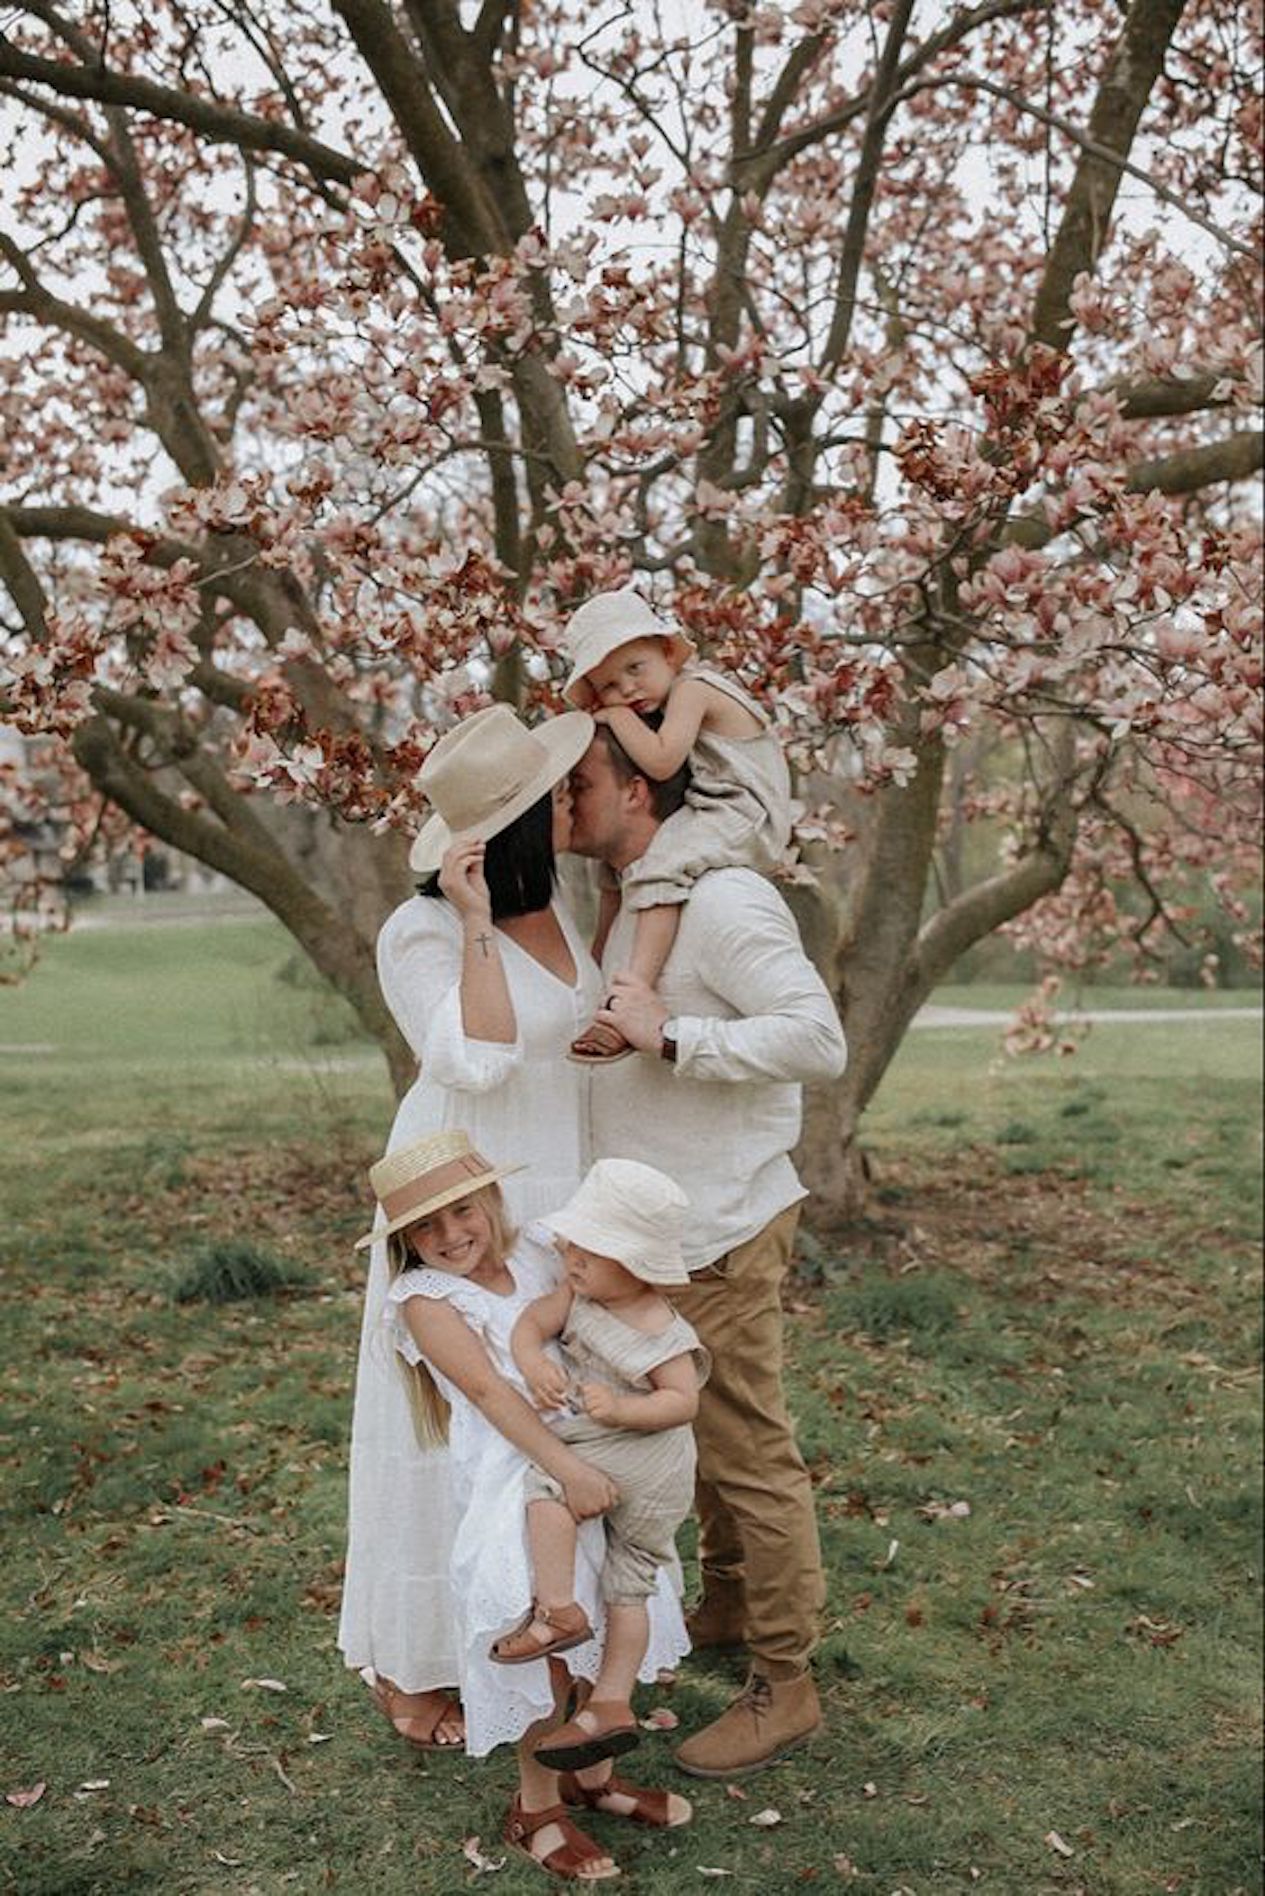 netral-with-spring 70+ Best Chosen Family Photo Outfit Ideas in Summer 2022